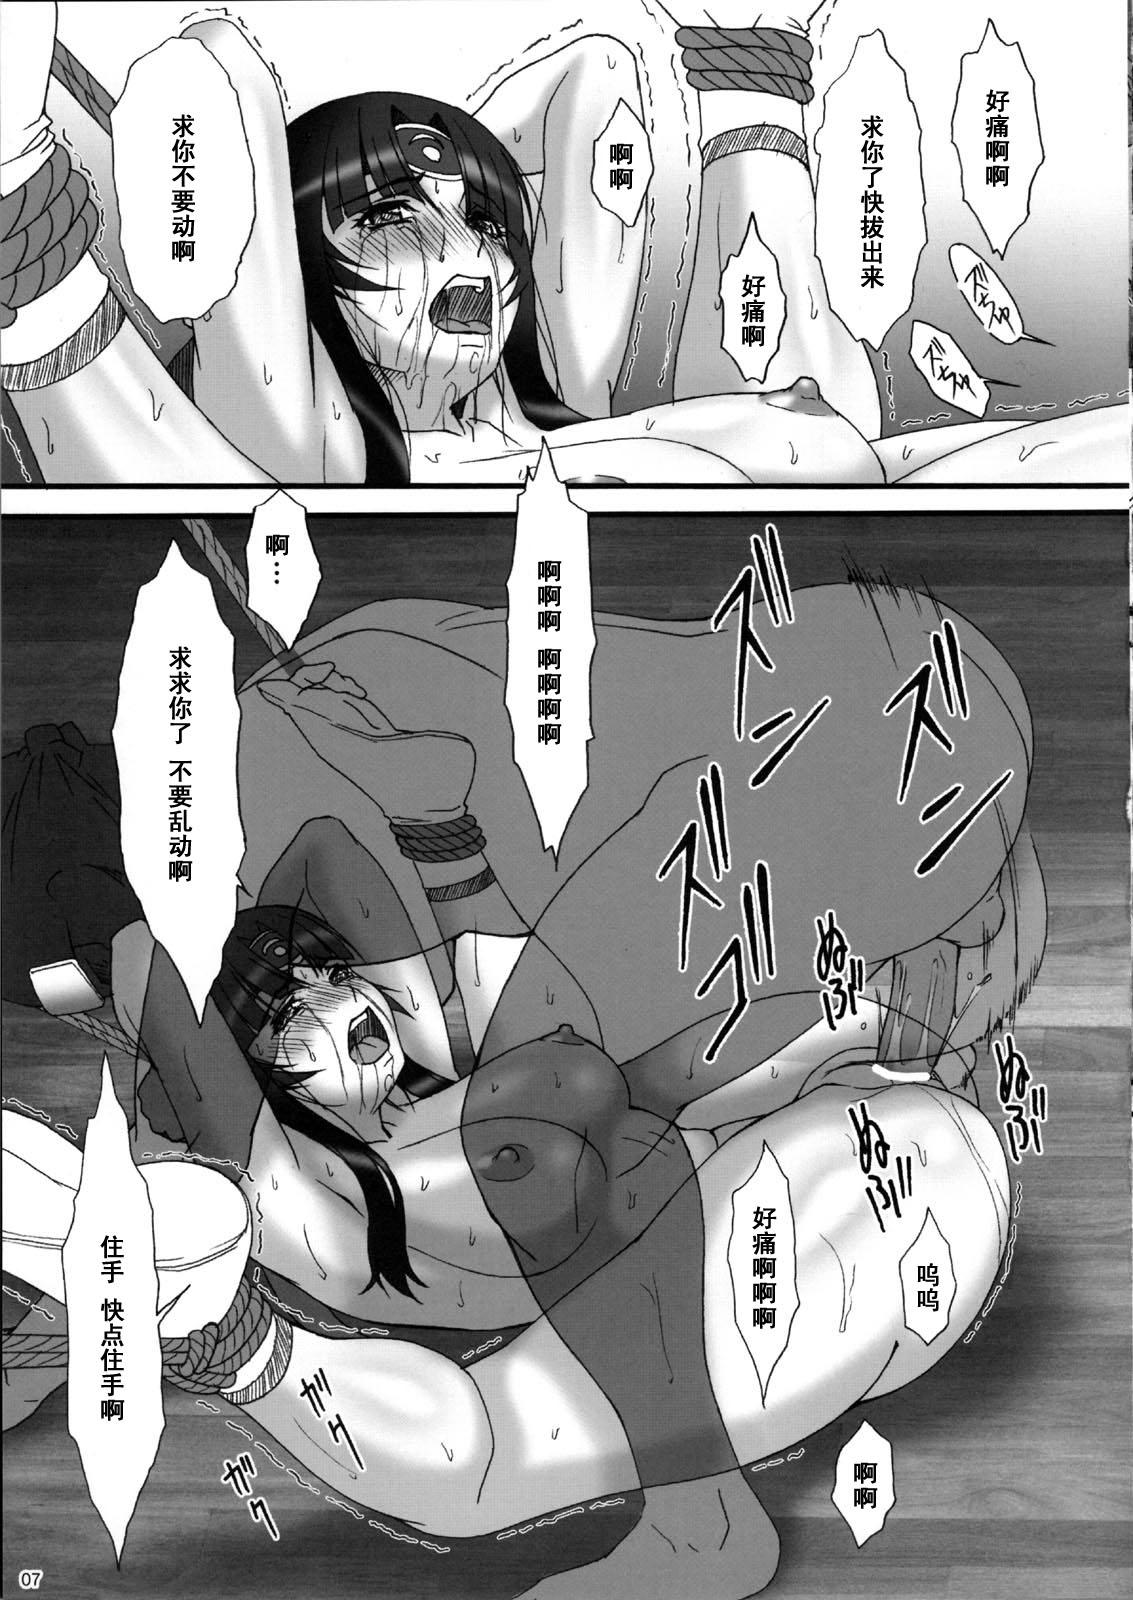 Licking Pussy Queen's Blast - Queens blade English - Page 7